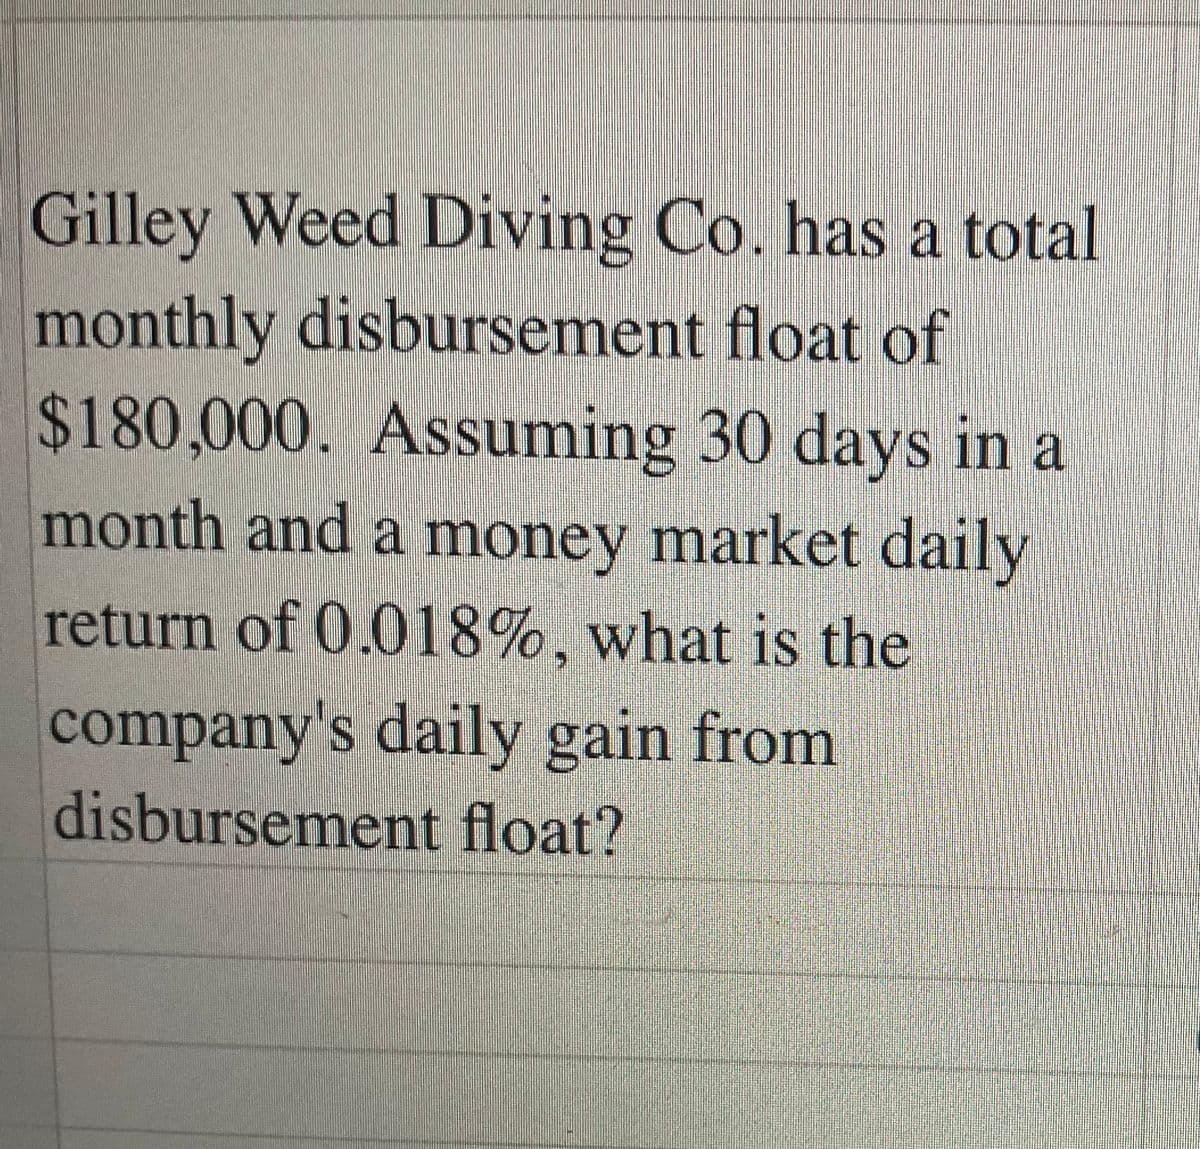 Gilley Weed Diving Co. has a total
monthly disbursement float of
$180,000. Assuming 30 days in a
month and a money market daily
return of 0.018%, what is the
company's daily gain from
disbursement float?